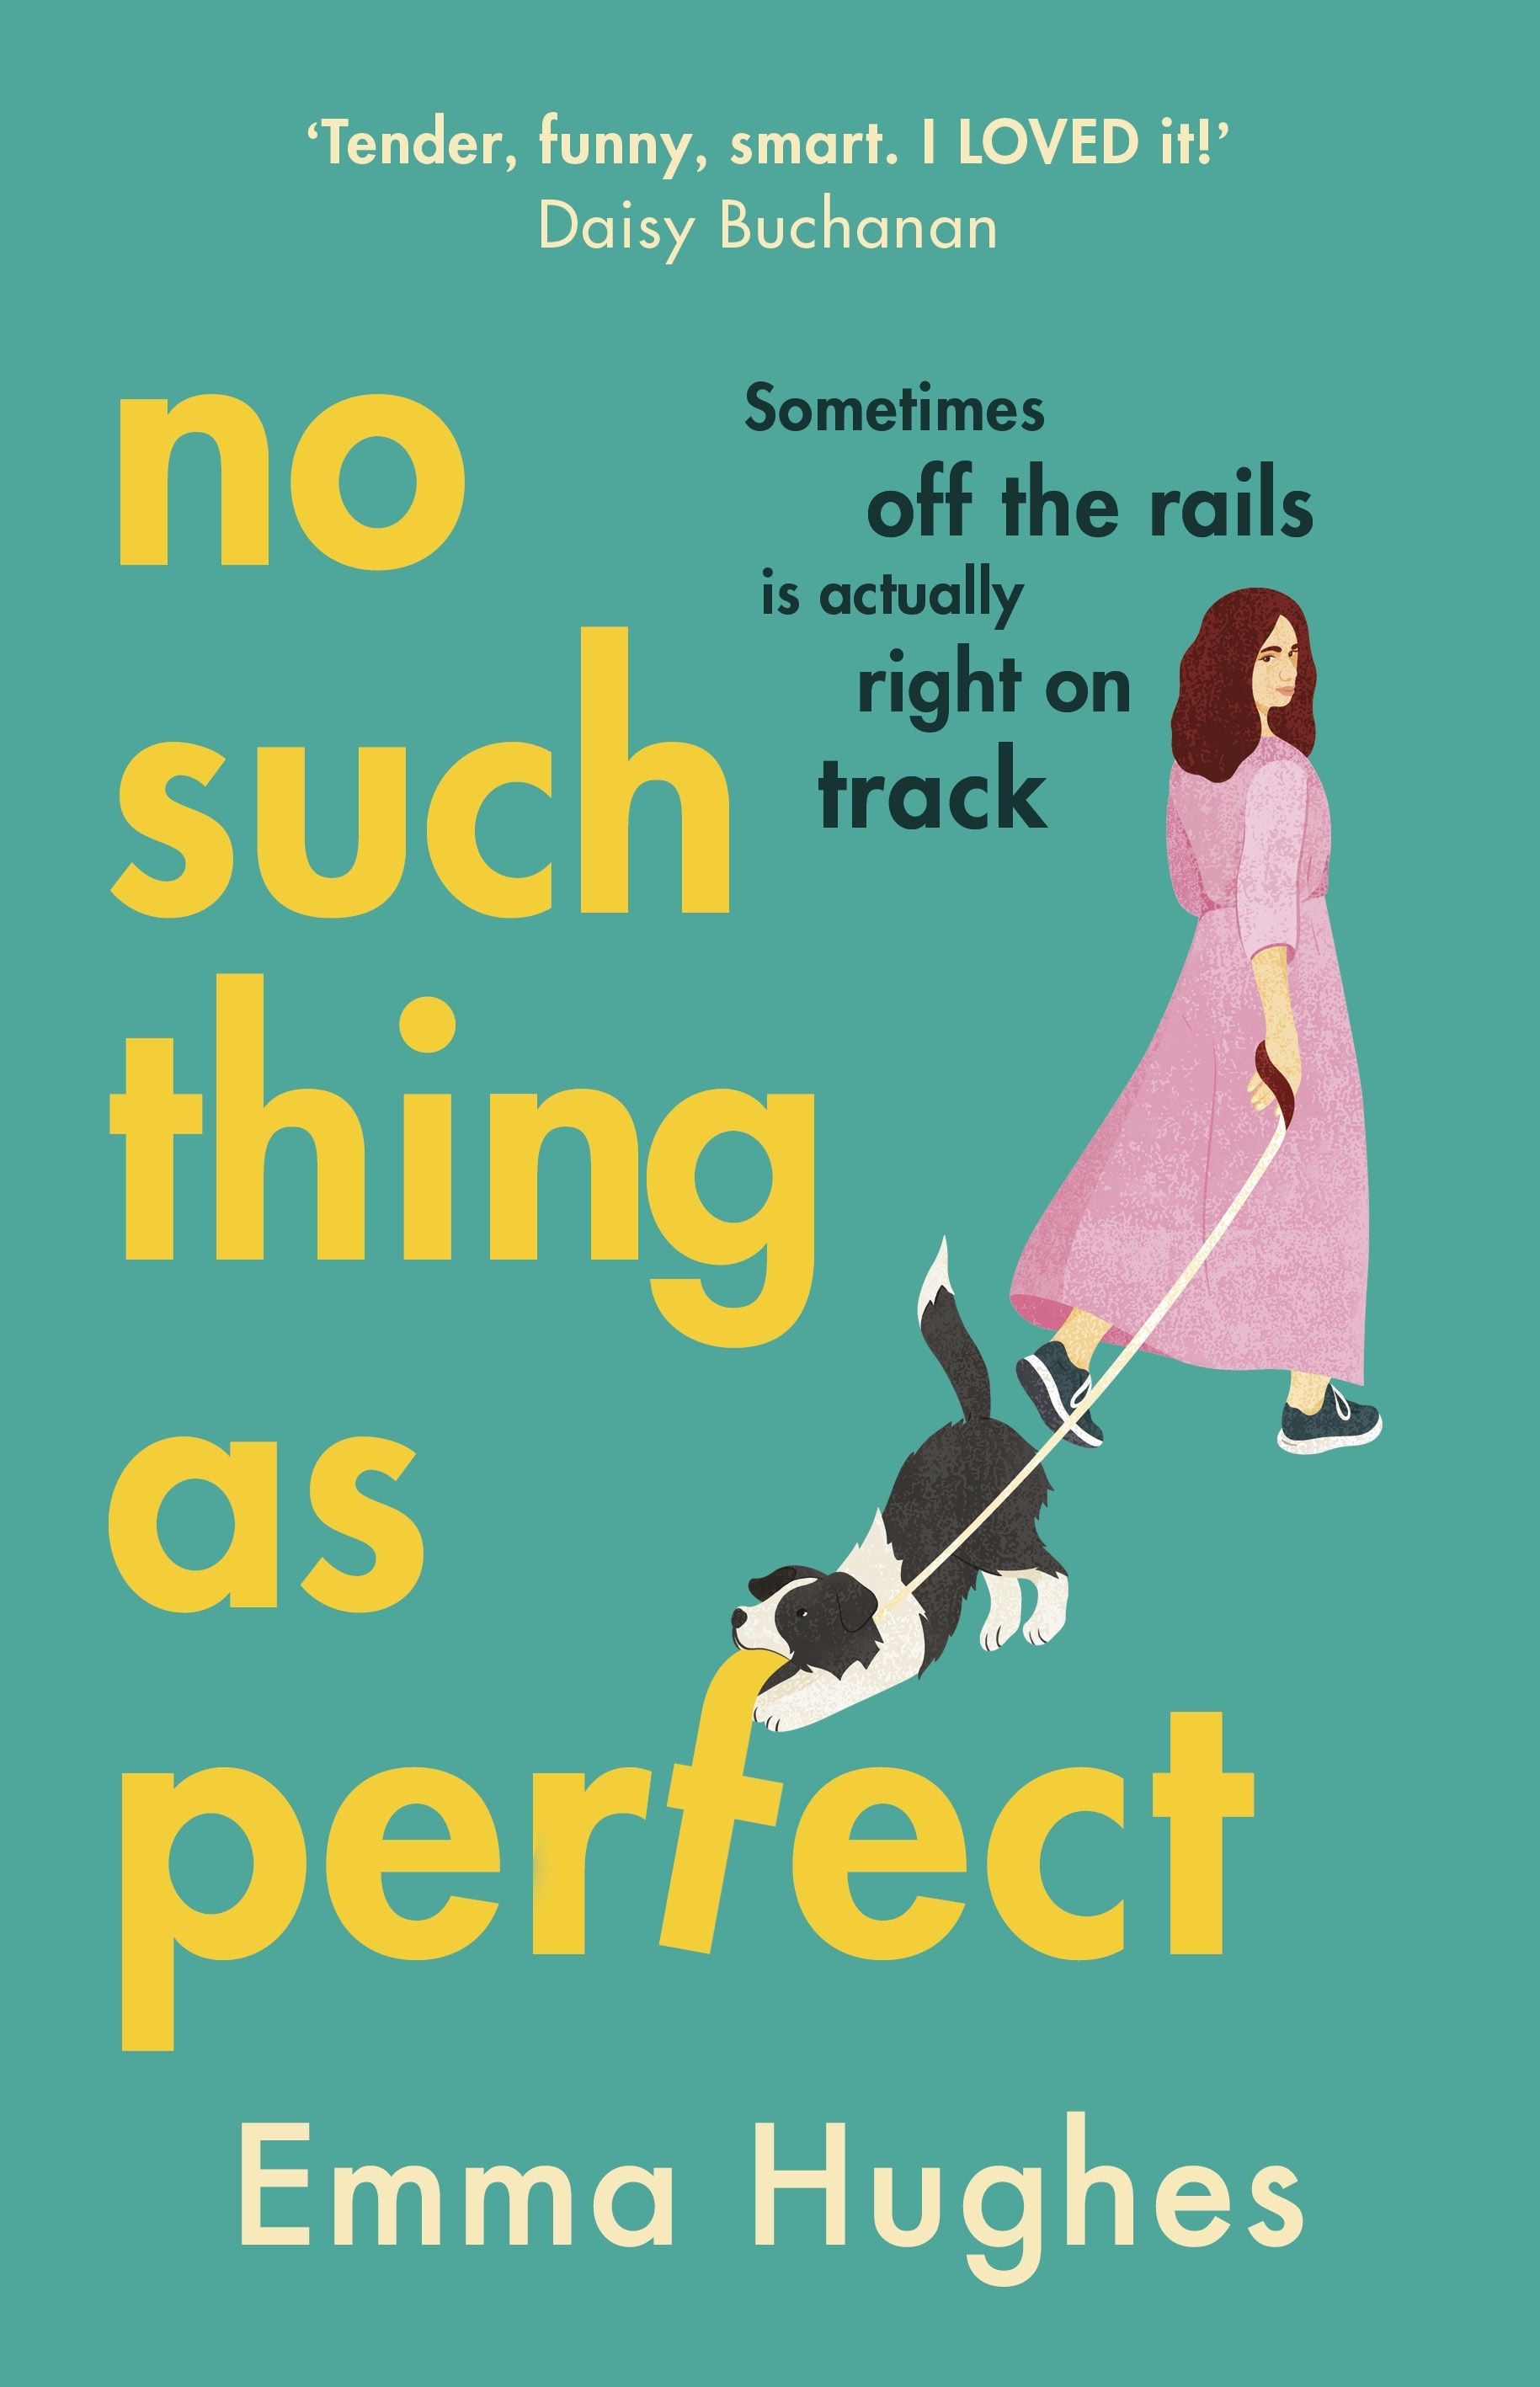 Book “No Such Thing As Perfect” by Emma Hughes — August 5, 2021